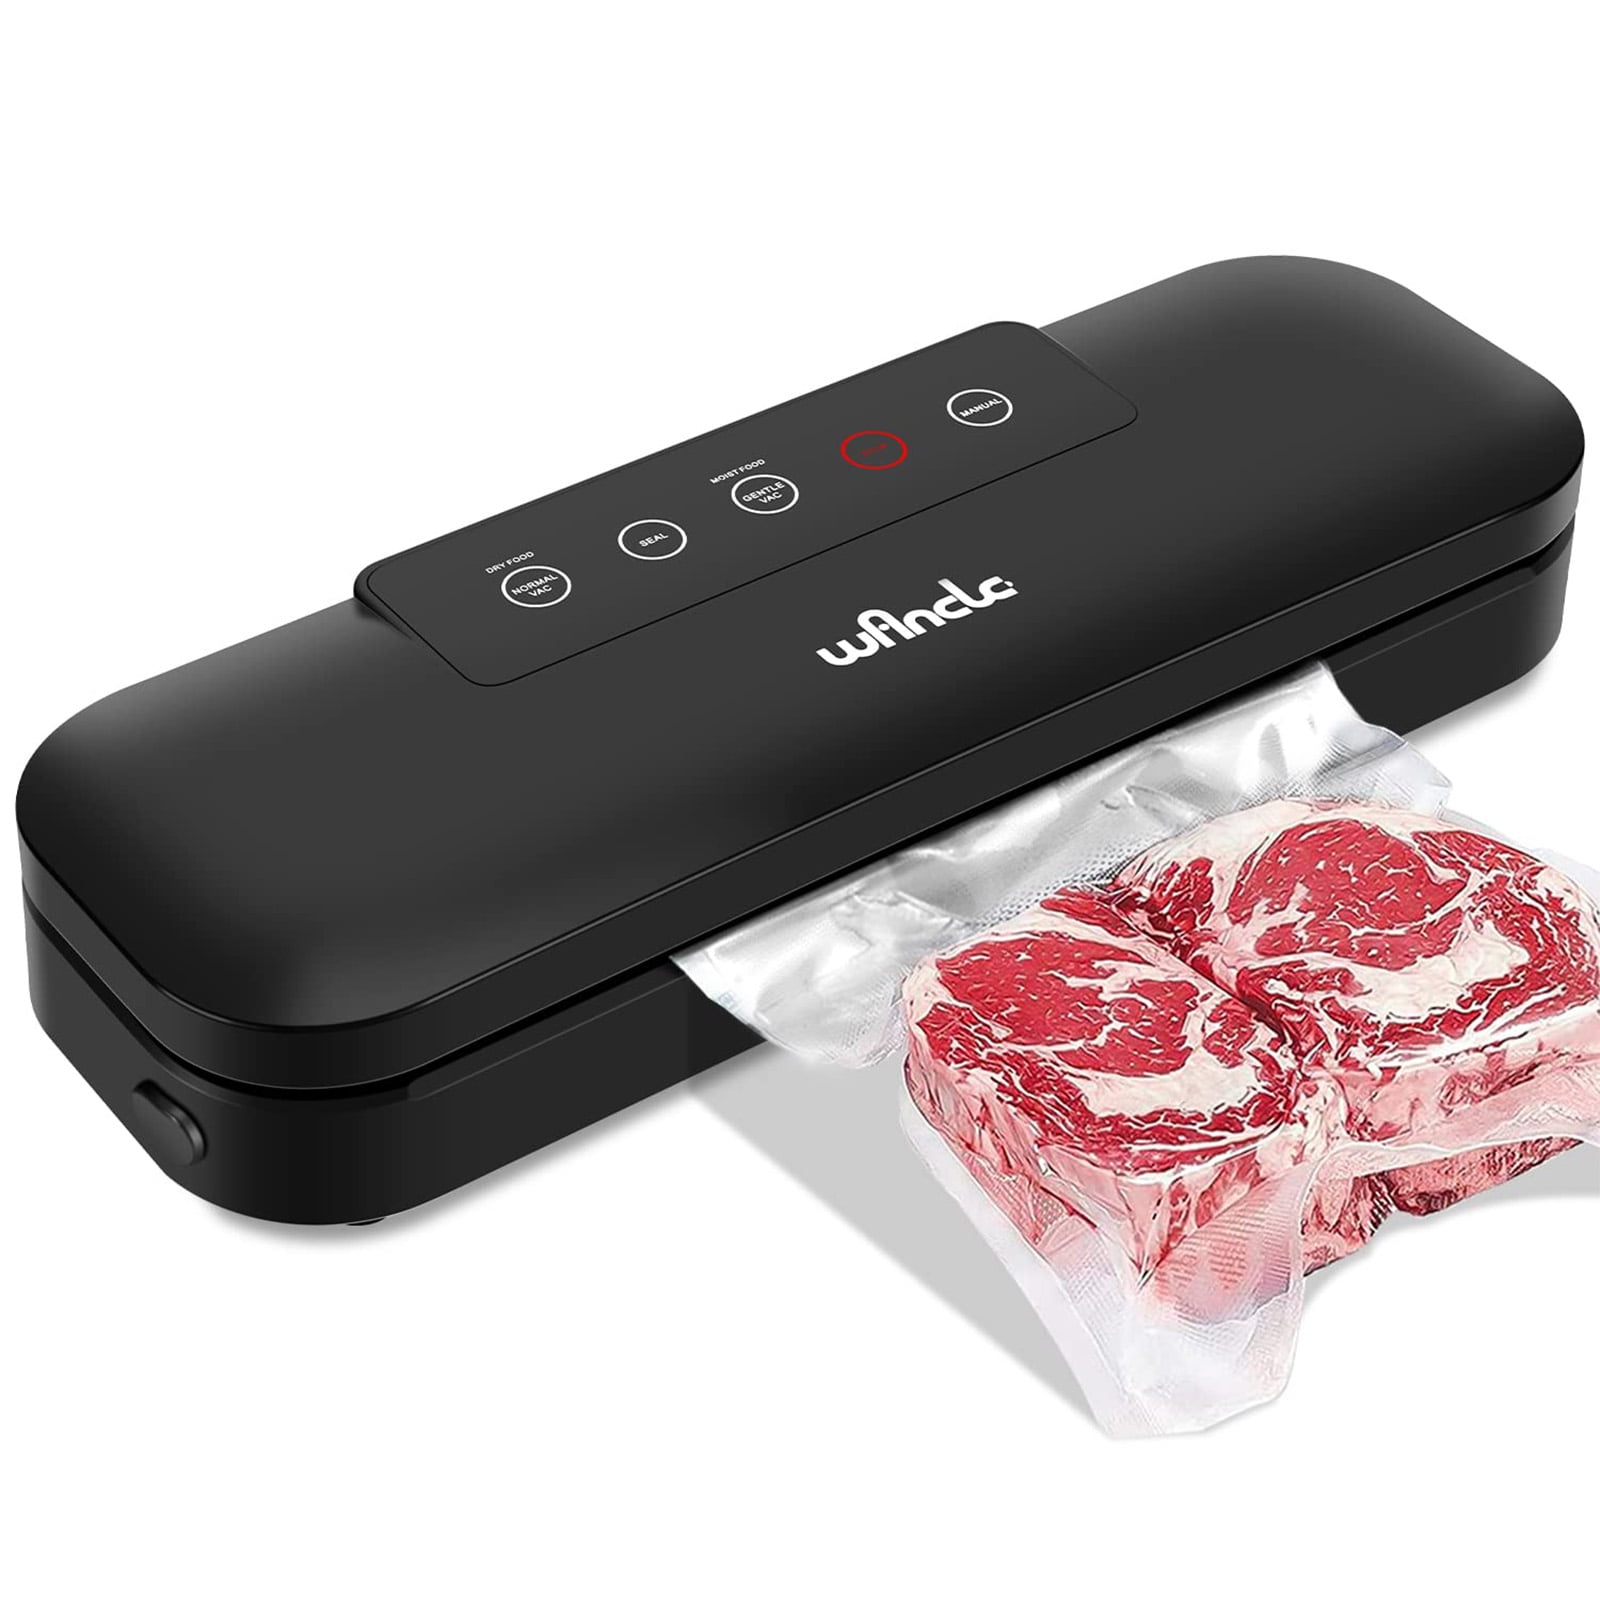 Vacuum Sealer Machine, 8 in 1 Pro Vacuum Seale machine;Bags and Cutter  Included; Dry&Moist&Soft with Starter Kit, Compact Design (Black)